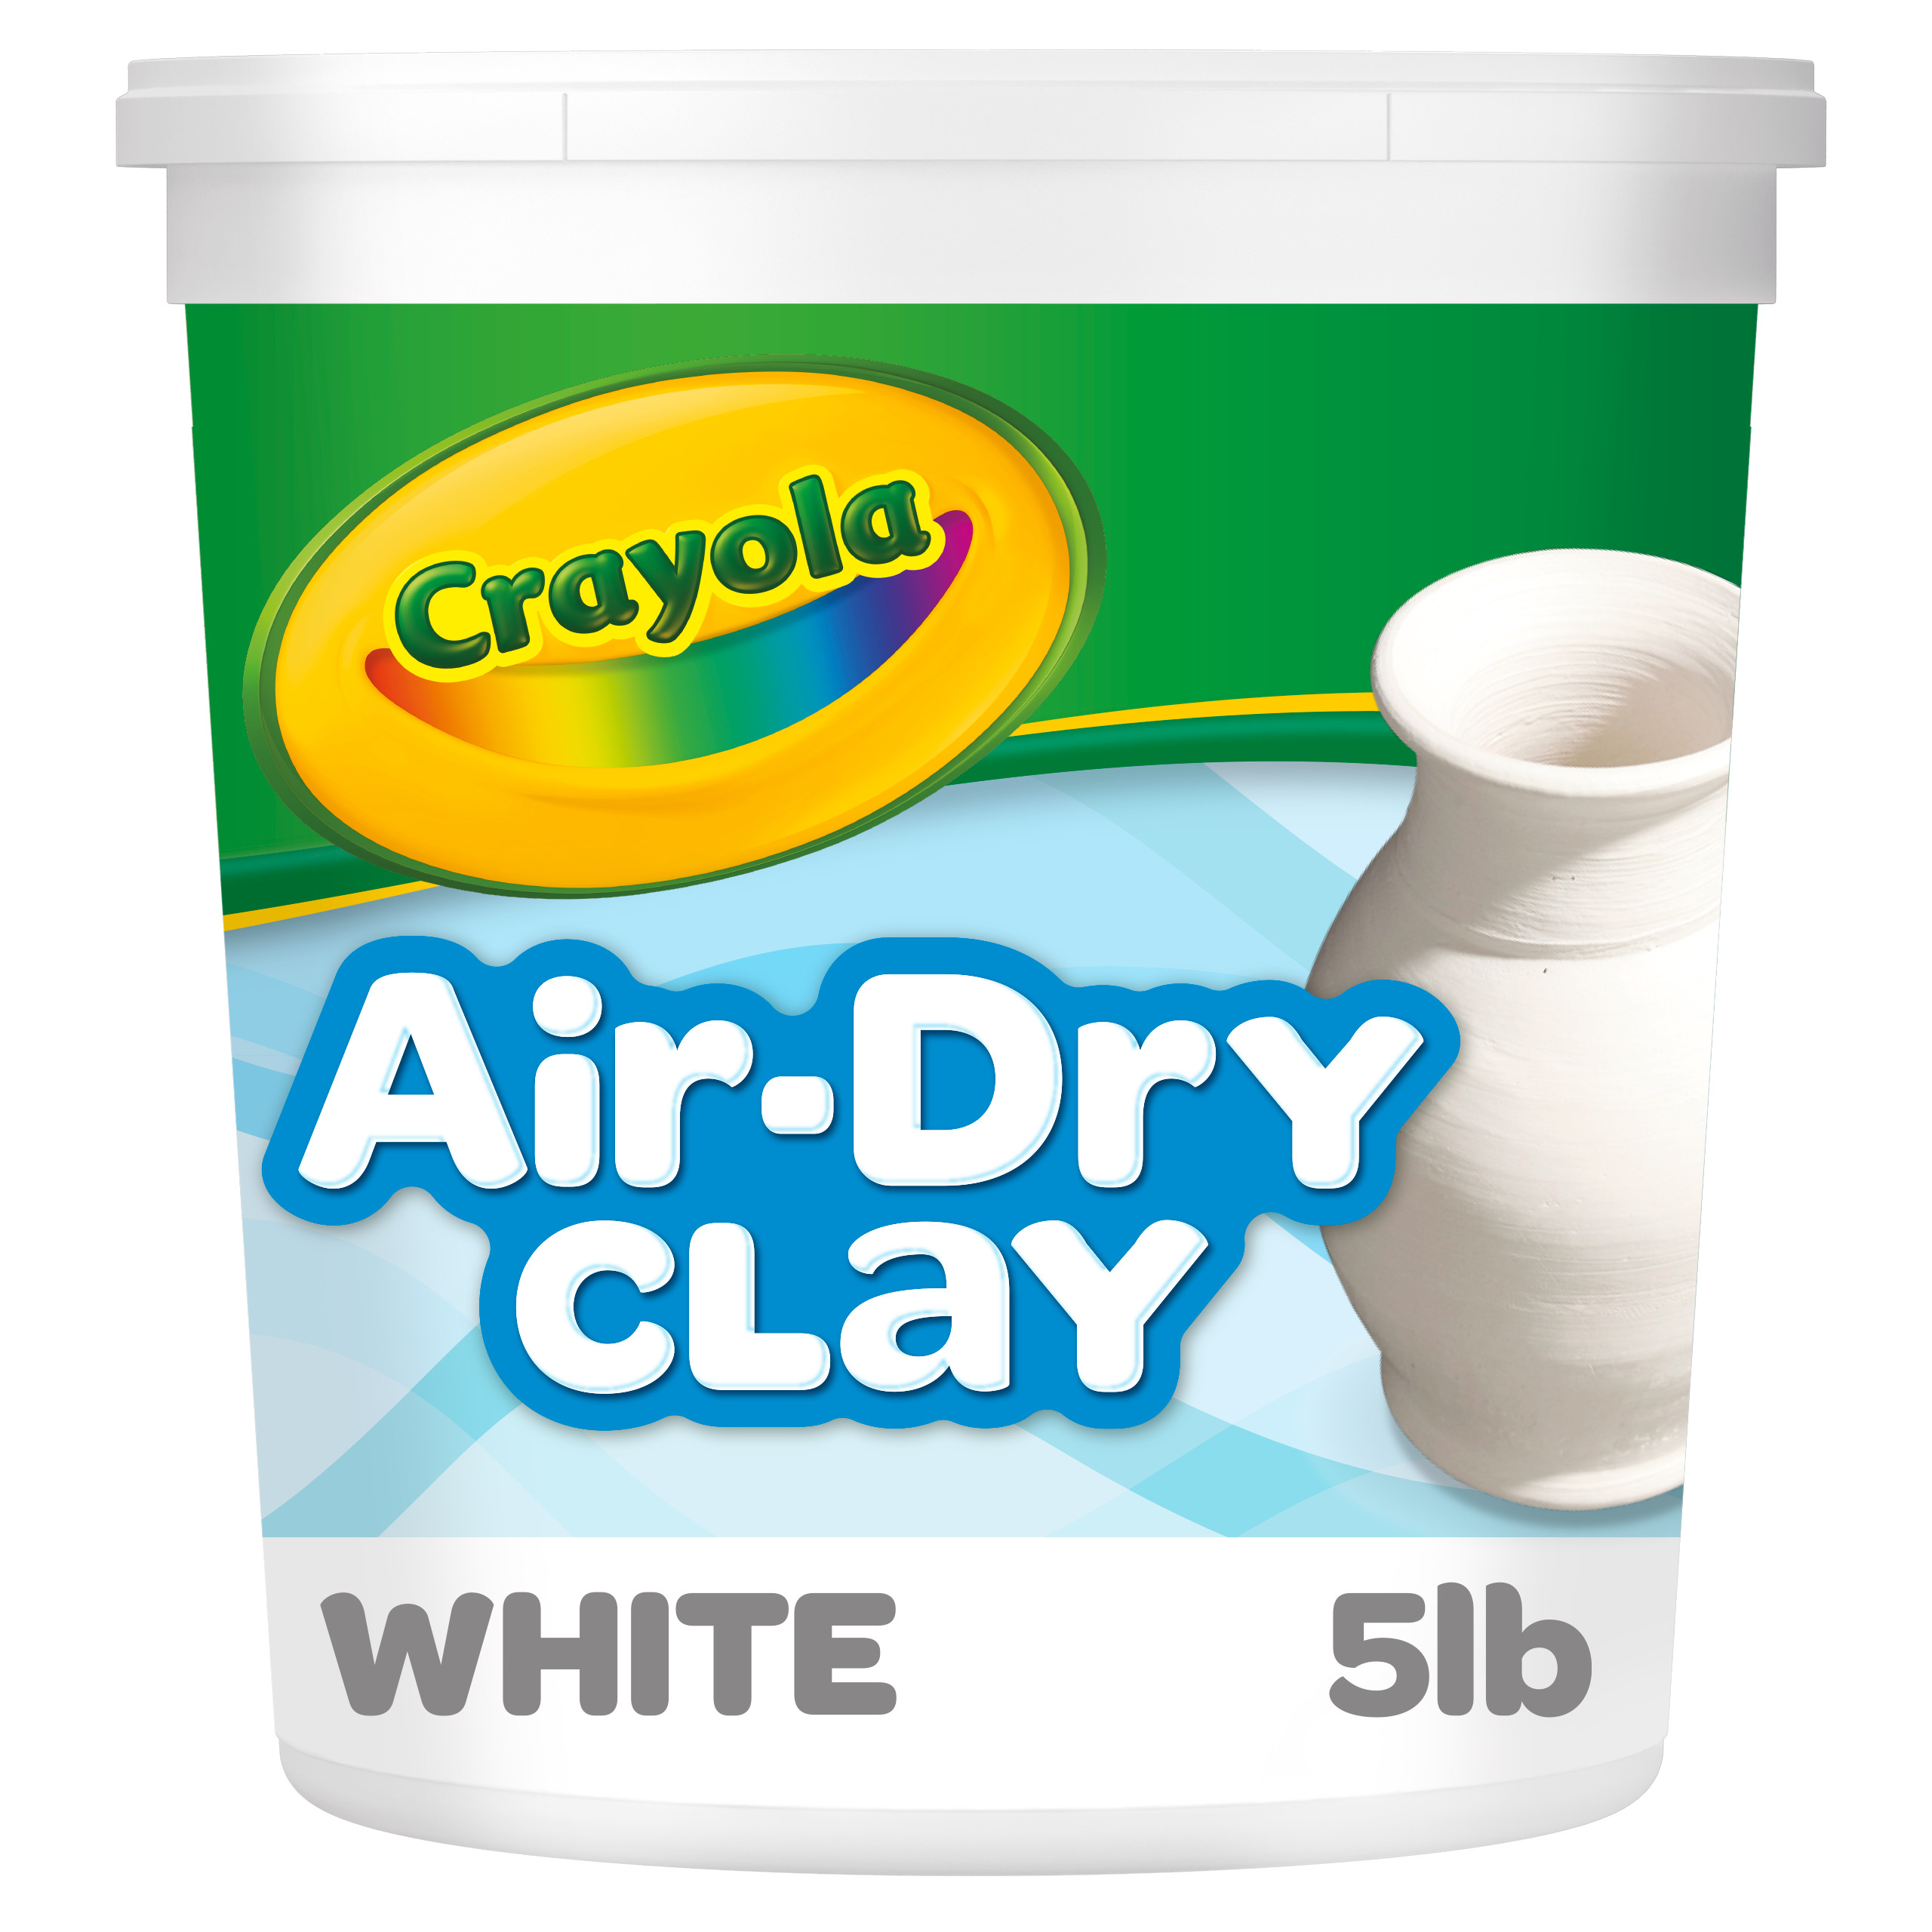 Crayola Air Dry Clay Bucket, No Bake Clay for Kids, 5Lbs, White, Easter Craft Supplies, Art Supplies - image 1 of 10